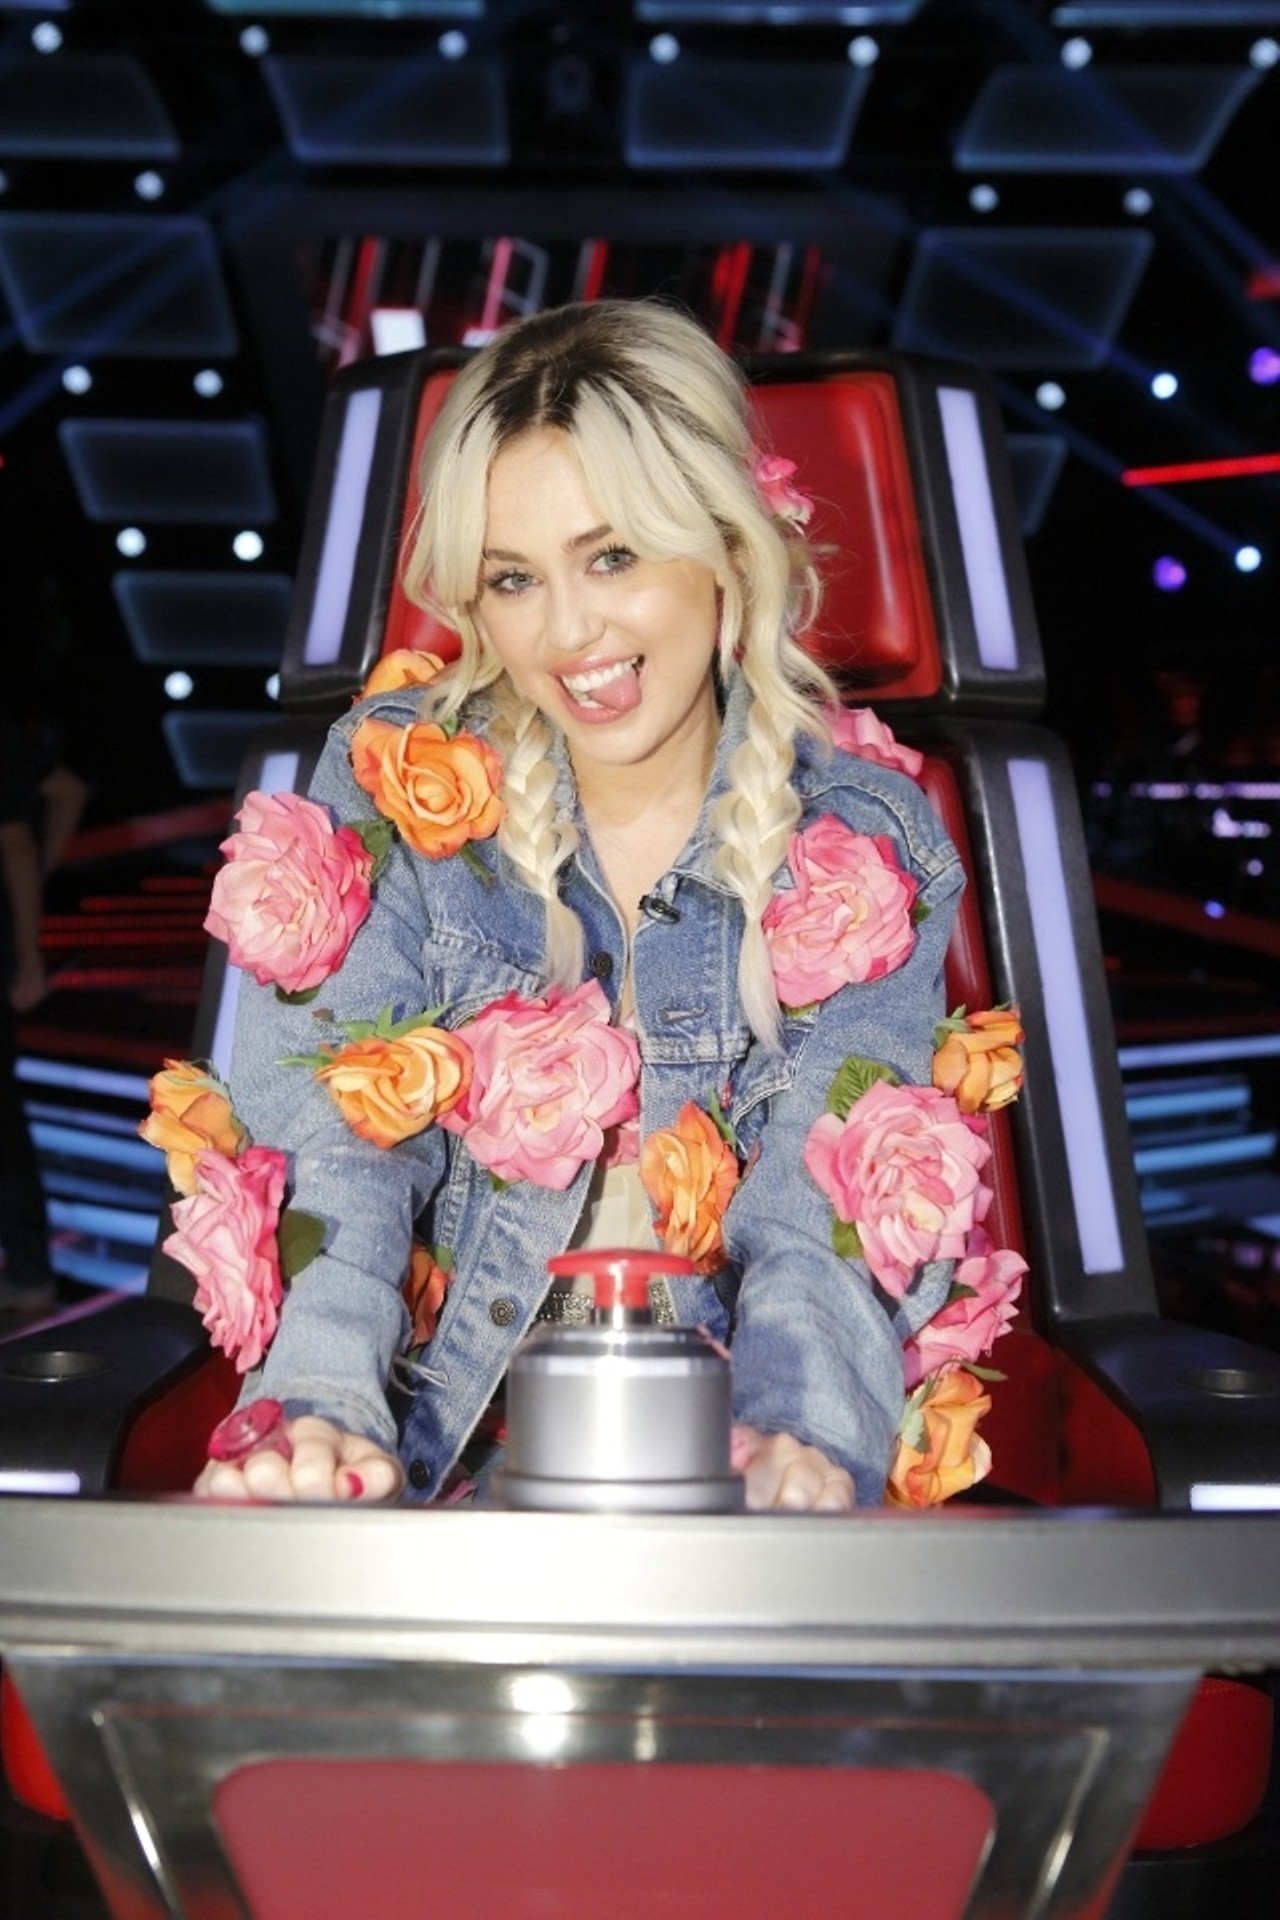 To achieve this crazy Miley Cyrus costume you habve to get a little crafty. Glue some fake flowers onto a pair of jeans, a jean jacket, and a pink leotard.
Photo courtesy of Fox 